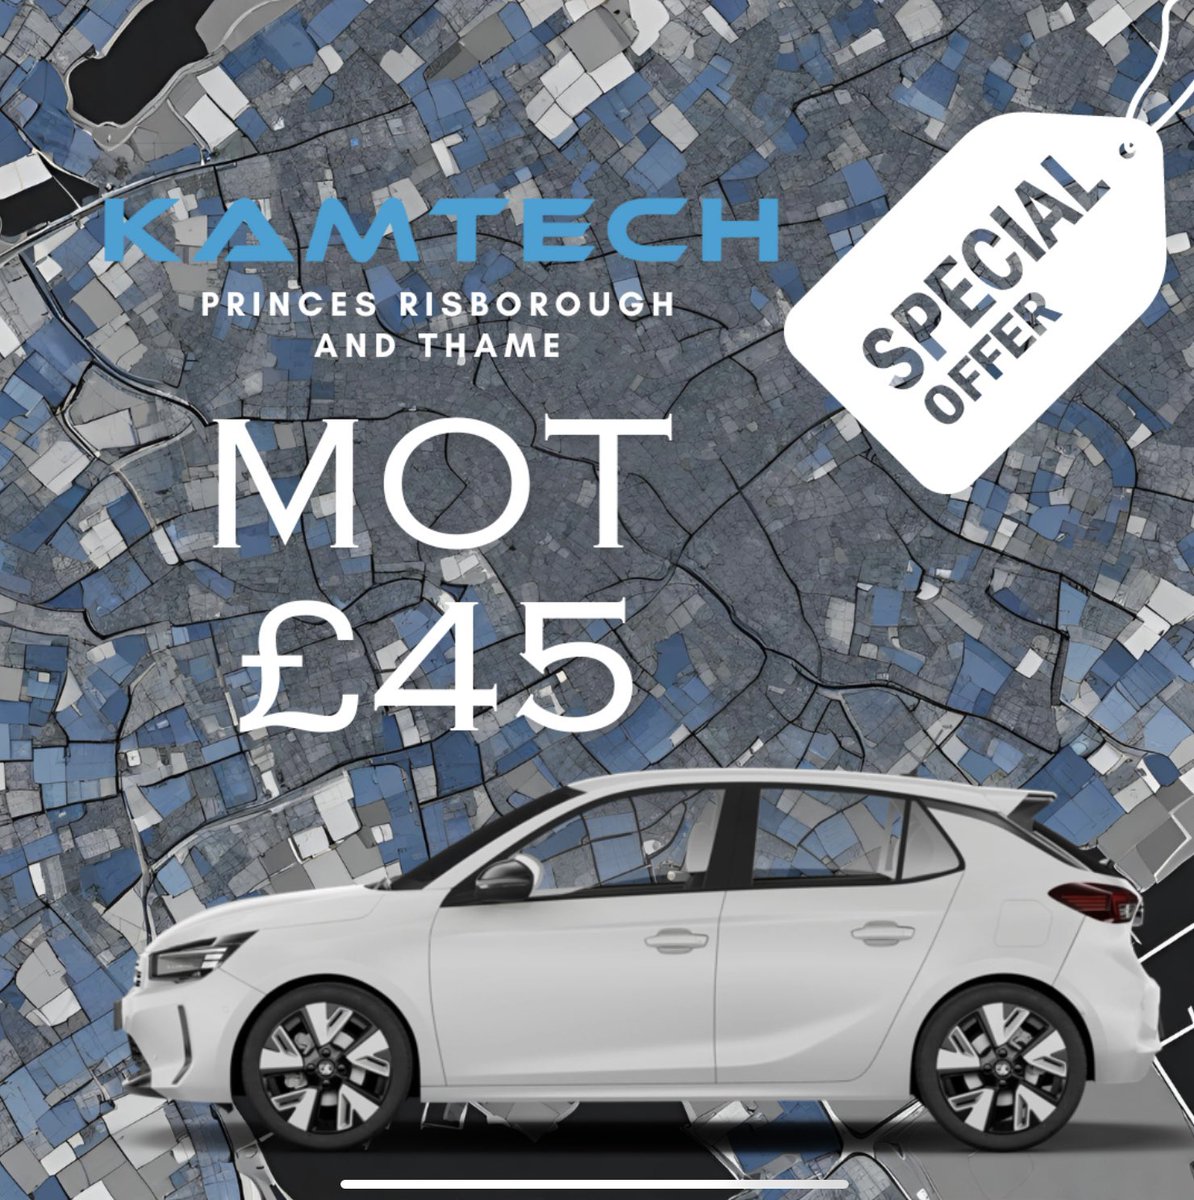 Rev up your savings with KAMTECH Garages! 🚗💨 Don't miss out on our special offer - MOTs for just £45!  Visit kamtech.co.uk today to book your appointment now!  #DriveSafe #SaveBig #PrincesRisborough #Thame *T & Cs Apply